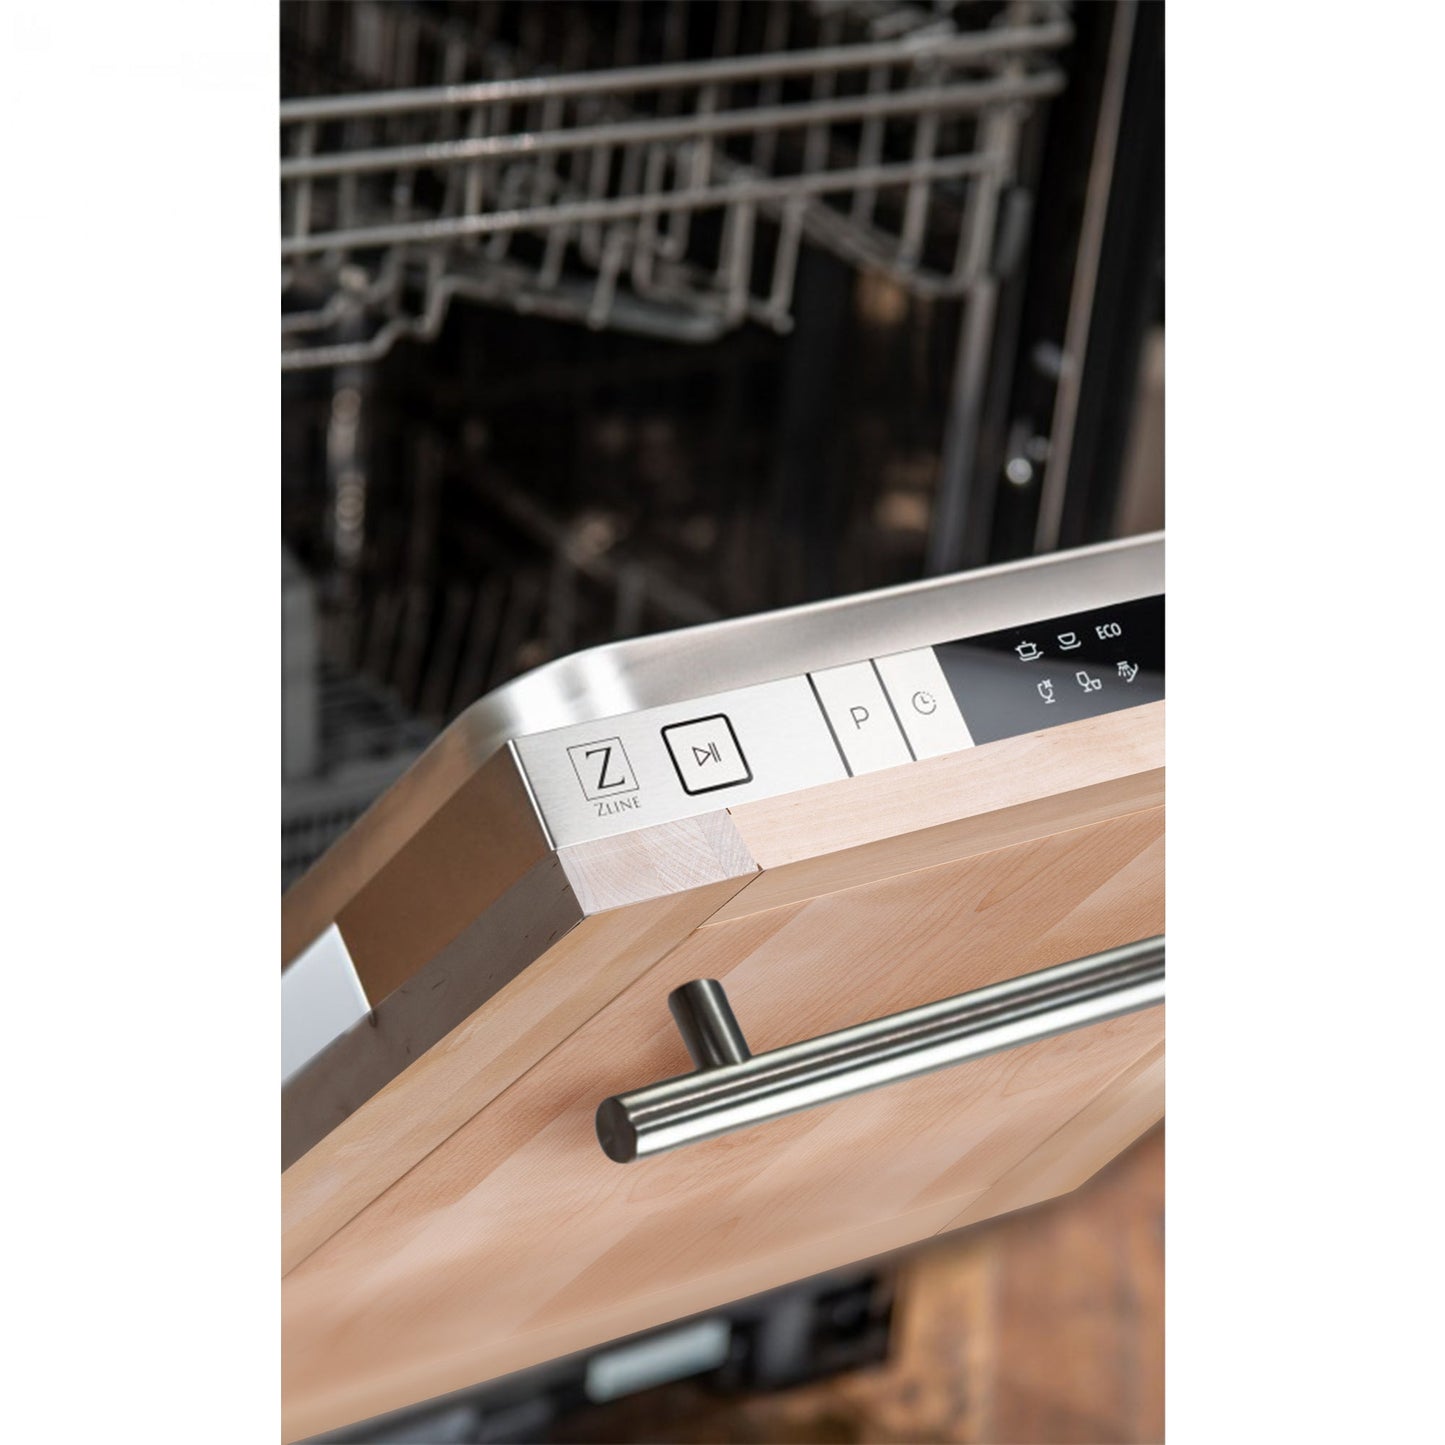 ZLINE 18 in. Compact Top Control Dishwasher with Unfinished Wooden Panel and Modern Style Handle, 52 dBa (DW-UF-18)